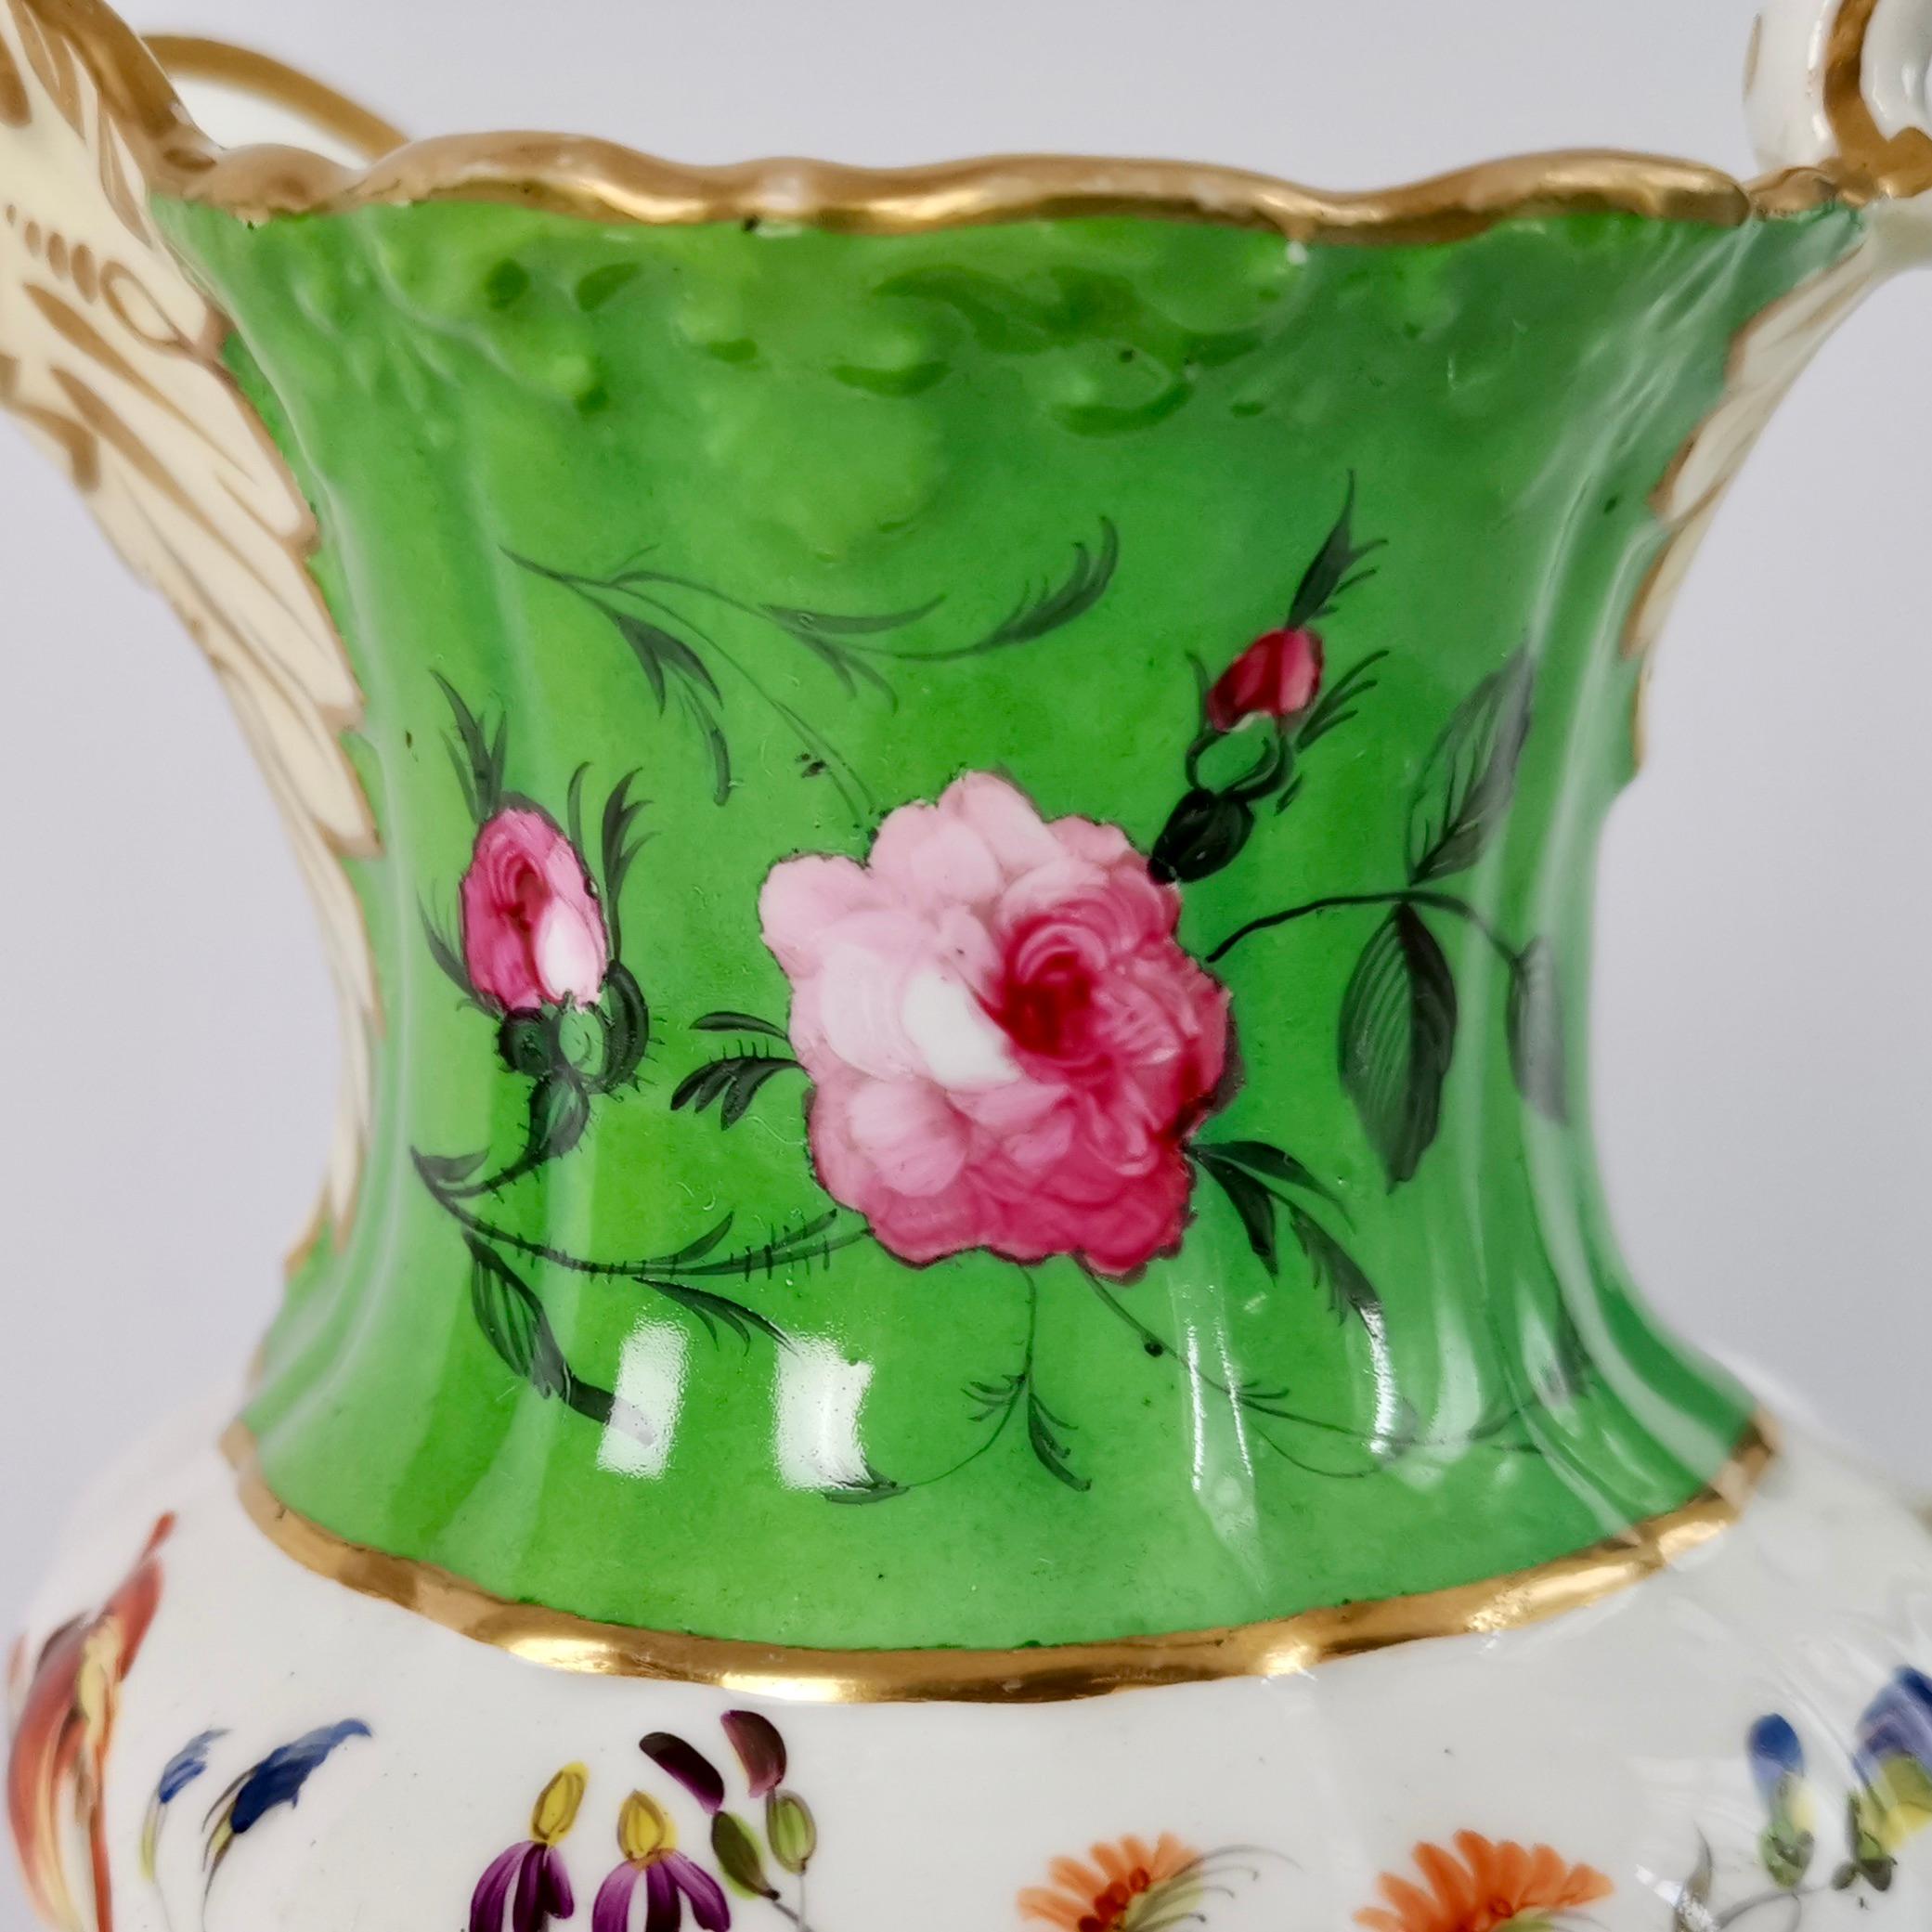 Hilditch Porcelain Pitcher, Apple Green with Hand Painted Flowers, circa 1830 5